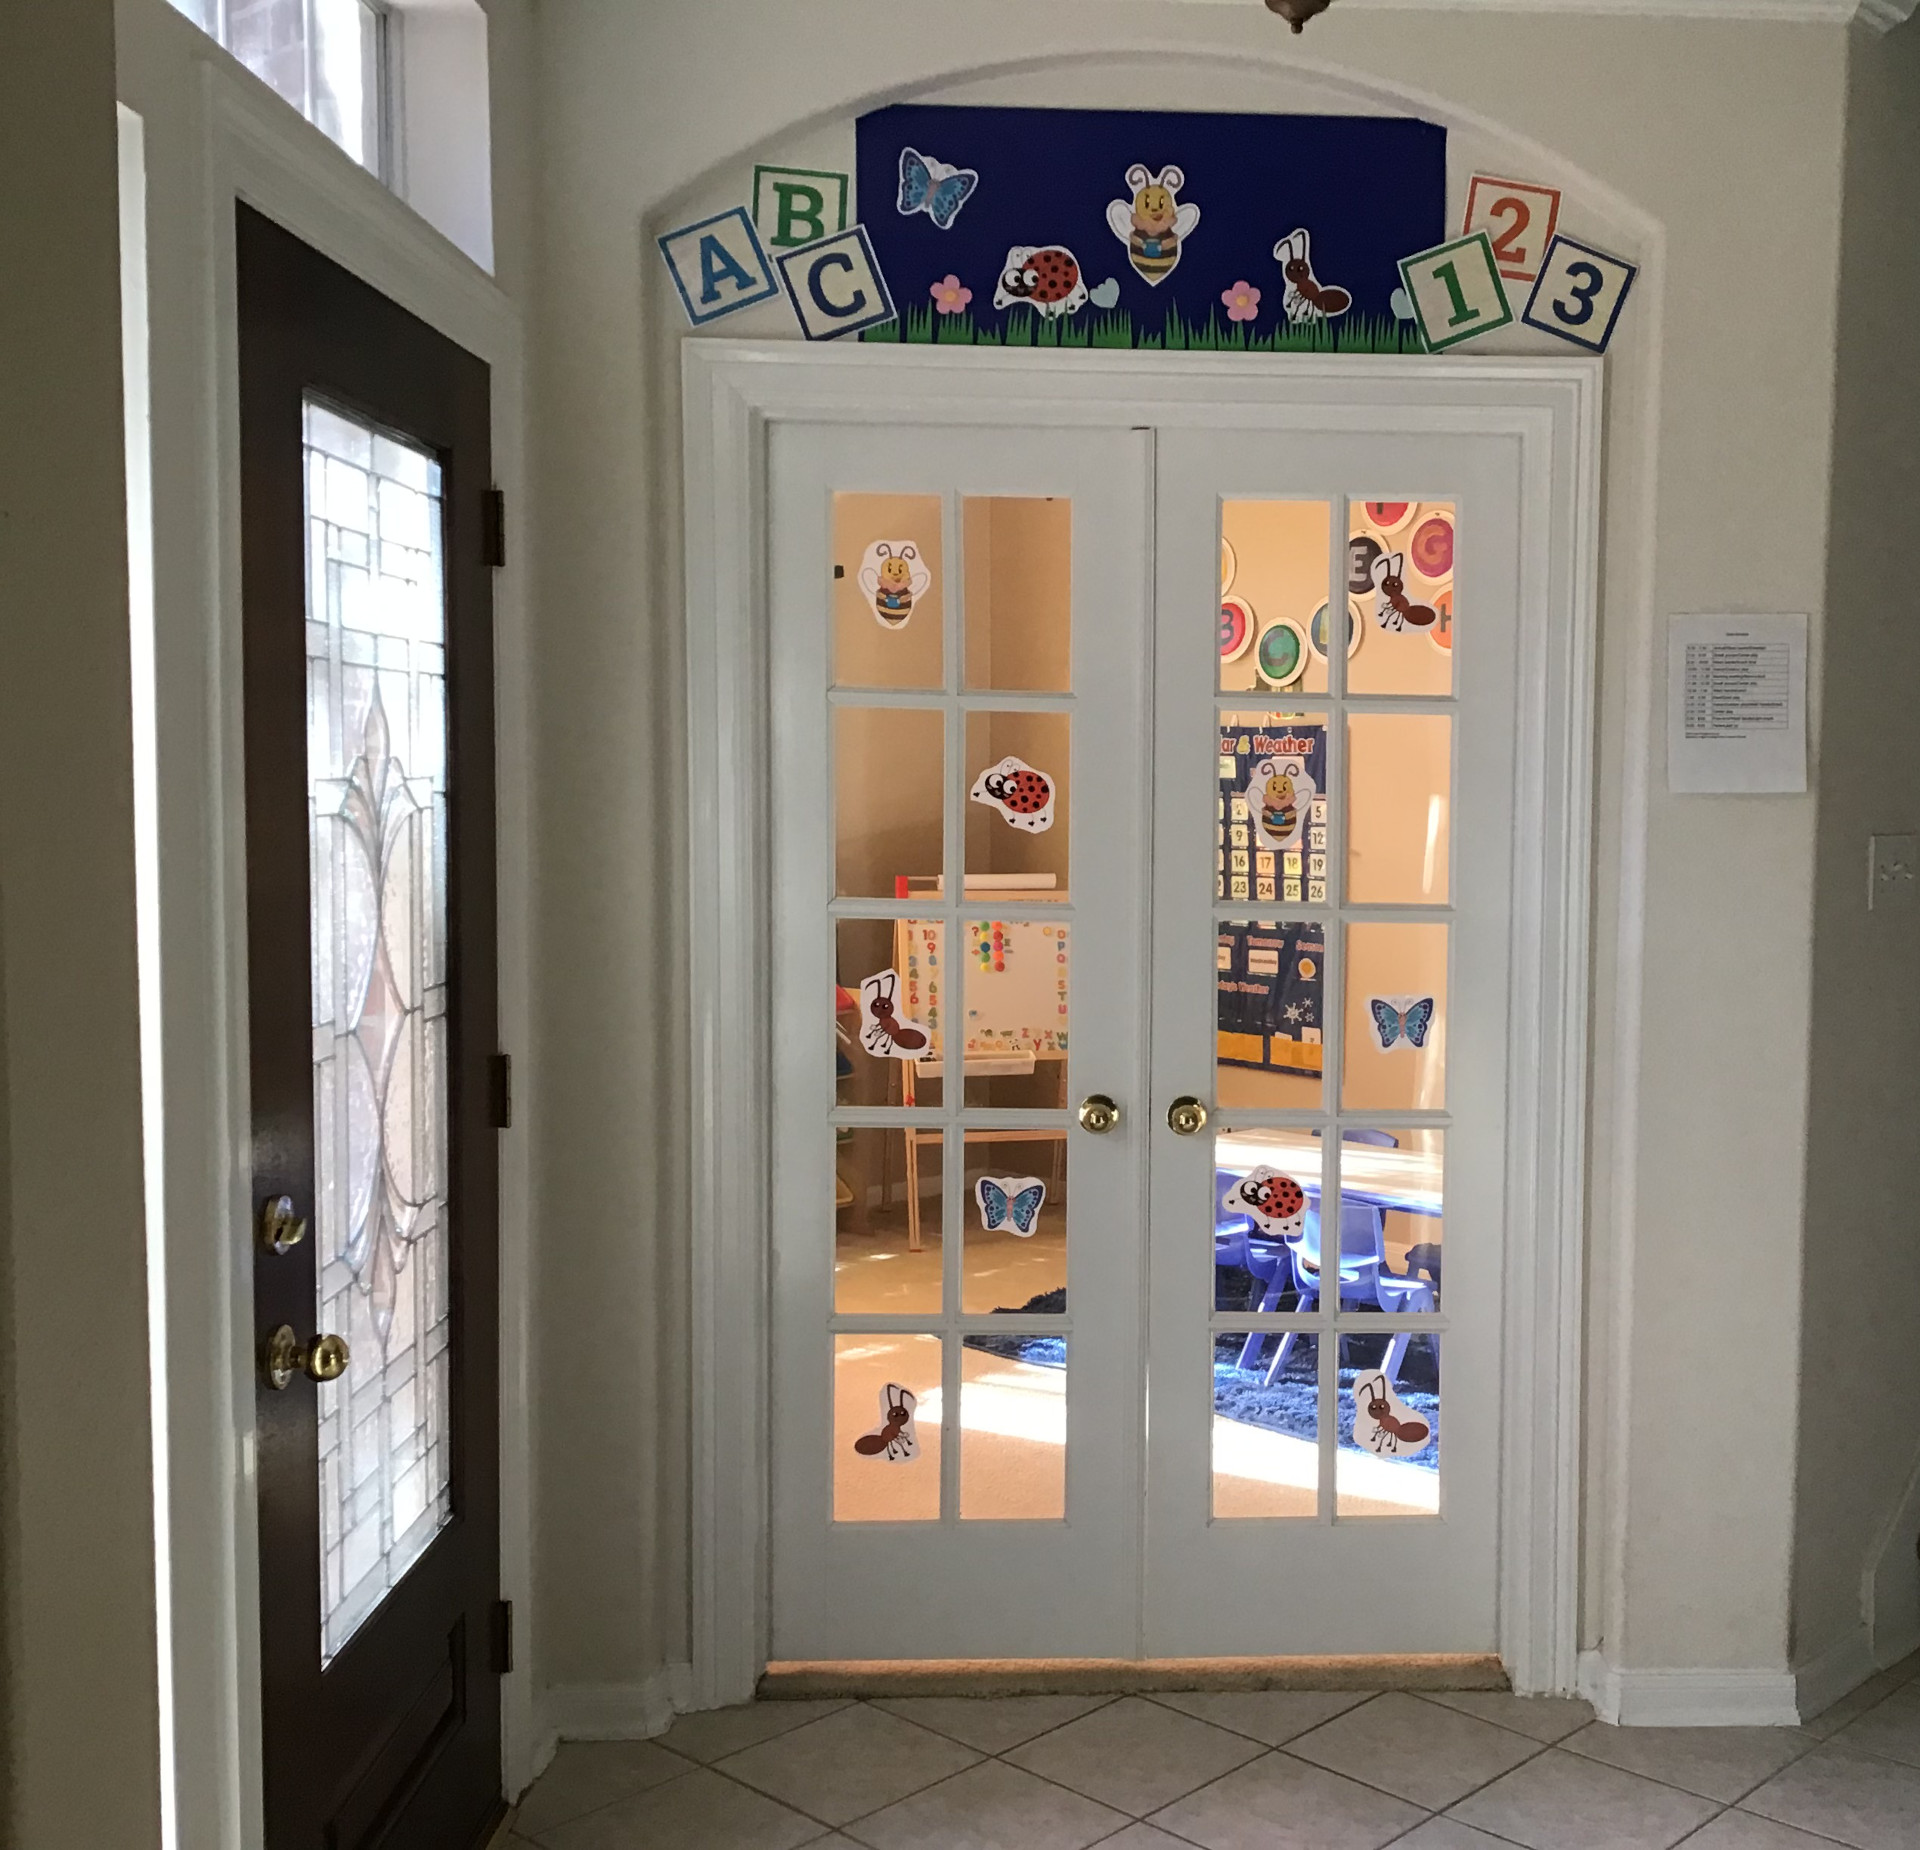 Image of a glass door of a daycare room.